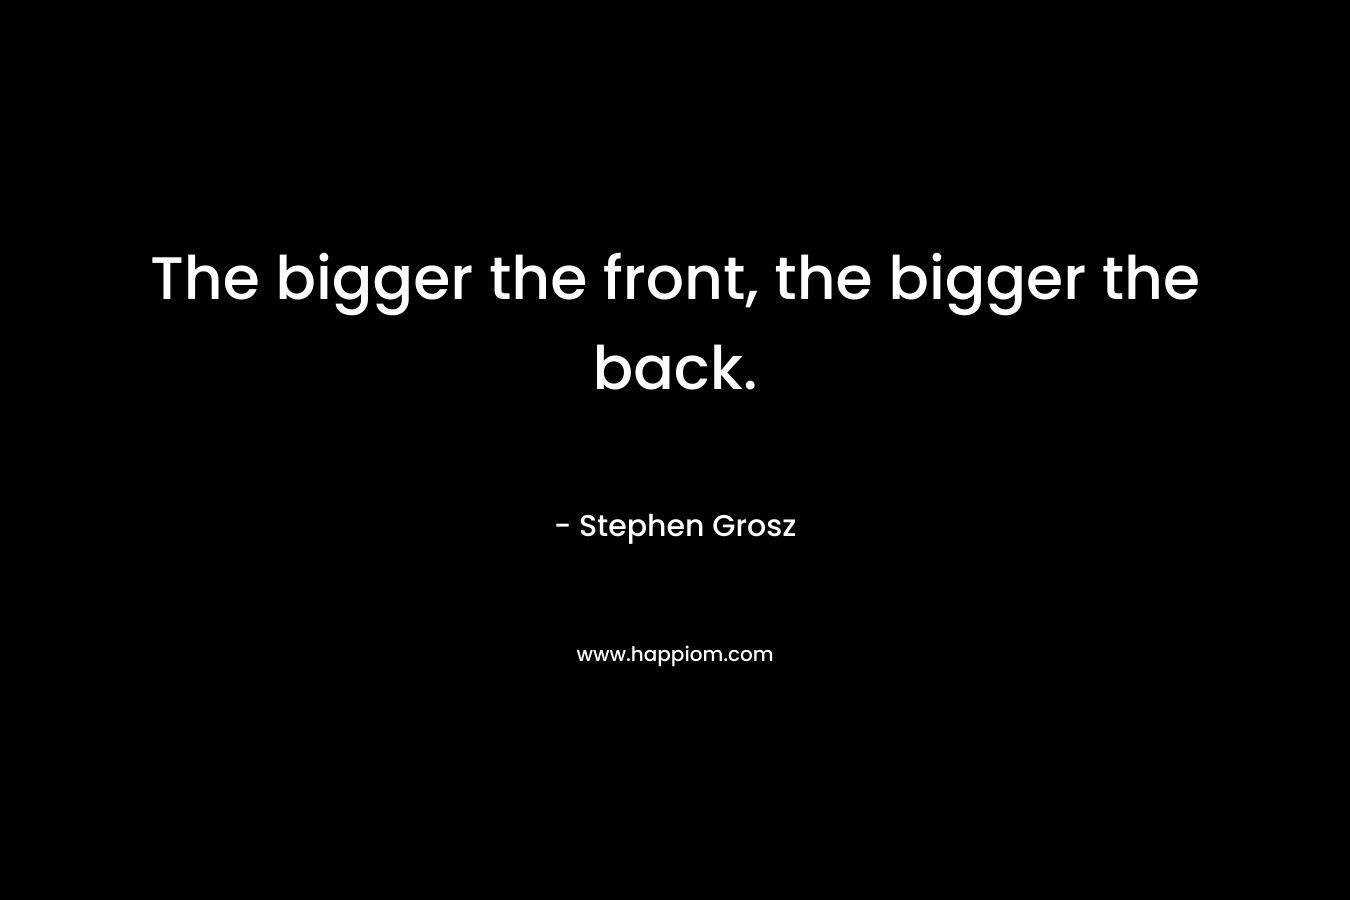 The bigger the front, the bigger the back. – Stephen Grosz